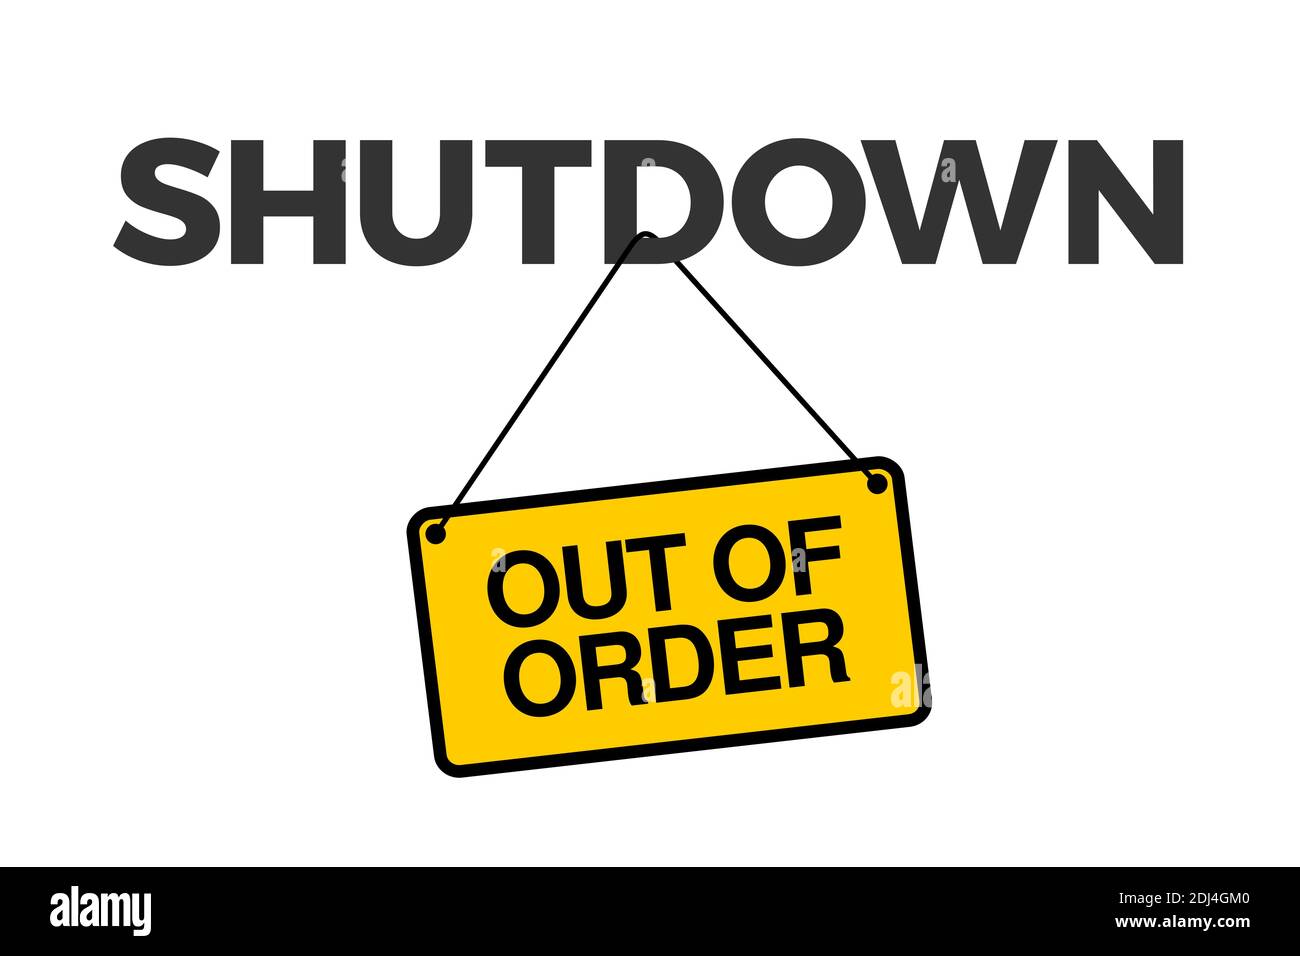 Shutdown - notification about being out of order and closed. Vector illustration Stock Photo